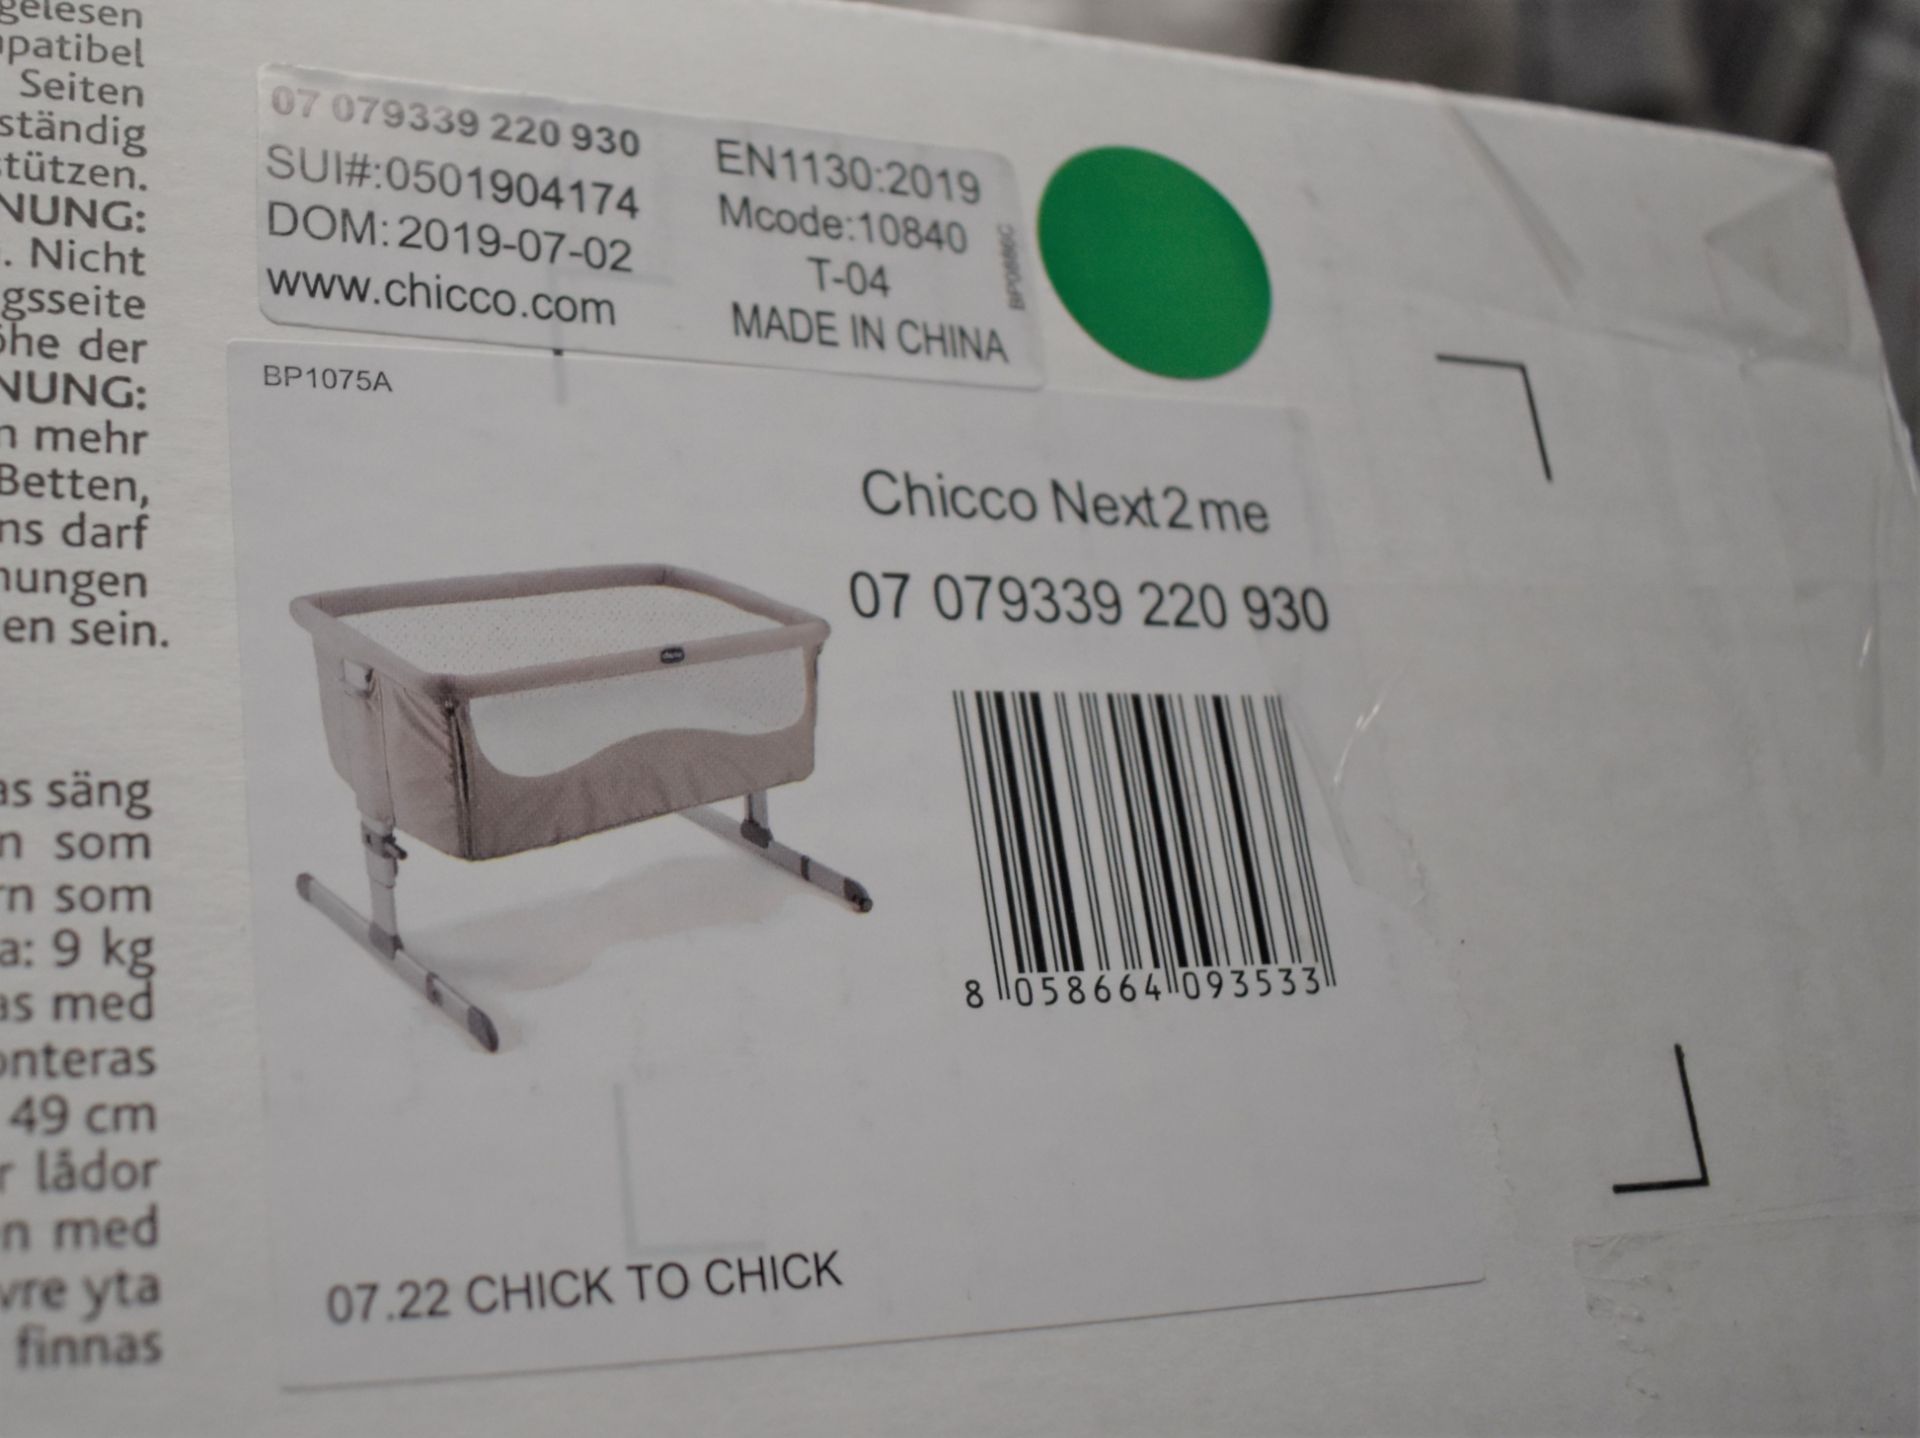 1 x CHICCO Next2me 'Chick to Chick' Bedside Baby Crib With Mattress - New Sealed Stock - RRP £299.00 - Image 8 of 8